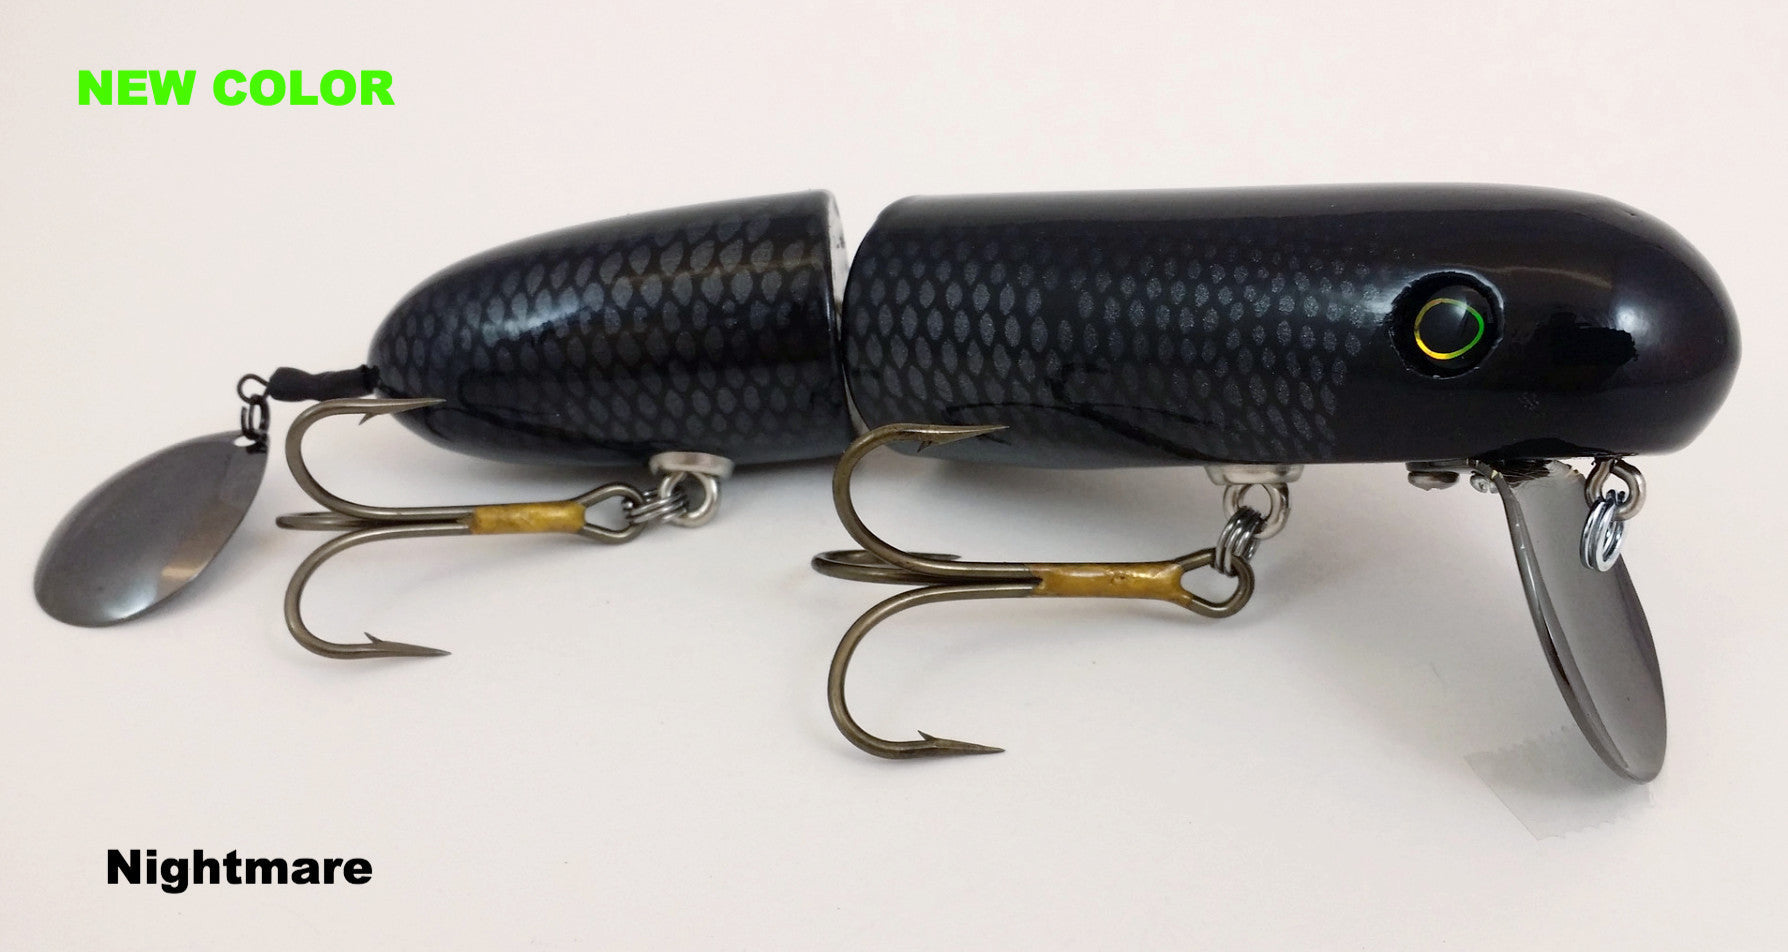 Lee Lures Surface Baits